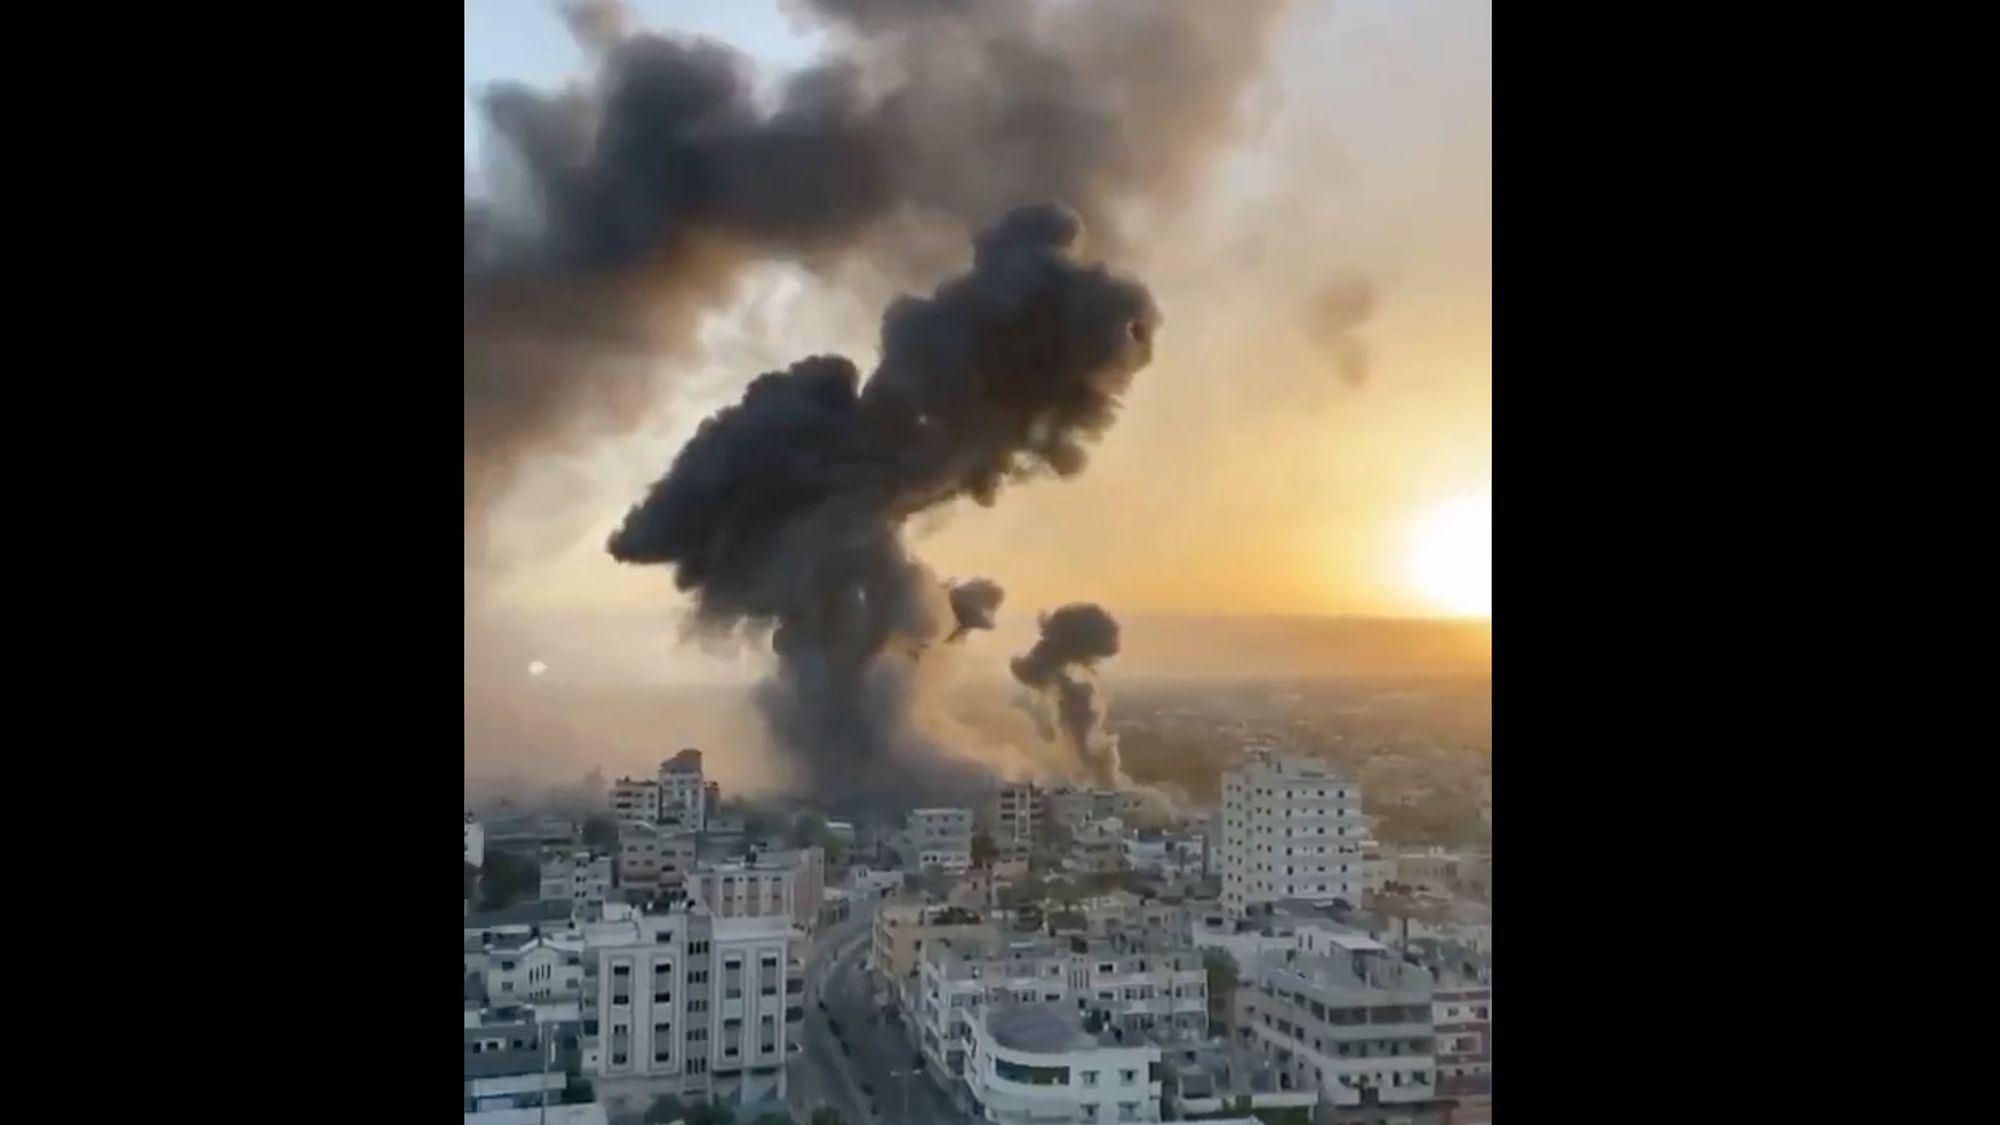 In another inhumane attack on Palestinians, a 12-story Gaza tower block house was struck by Israeli missiles on Saturday, 15 May.